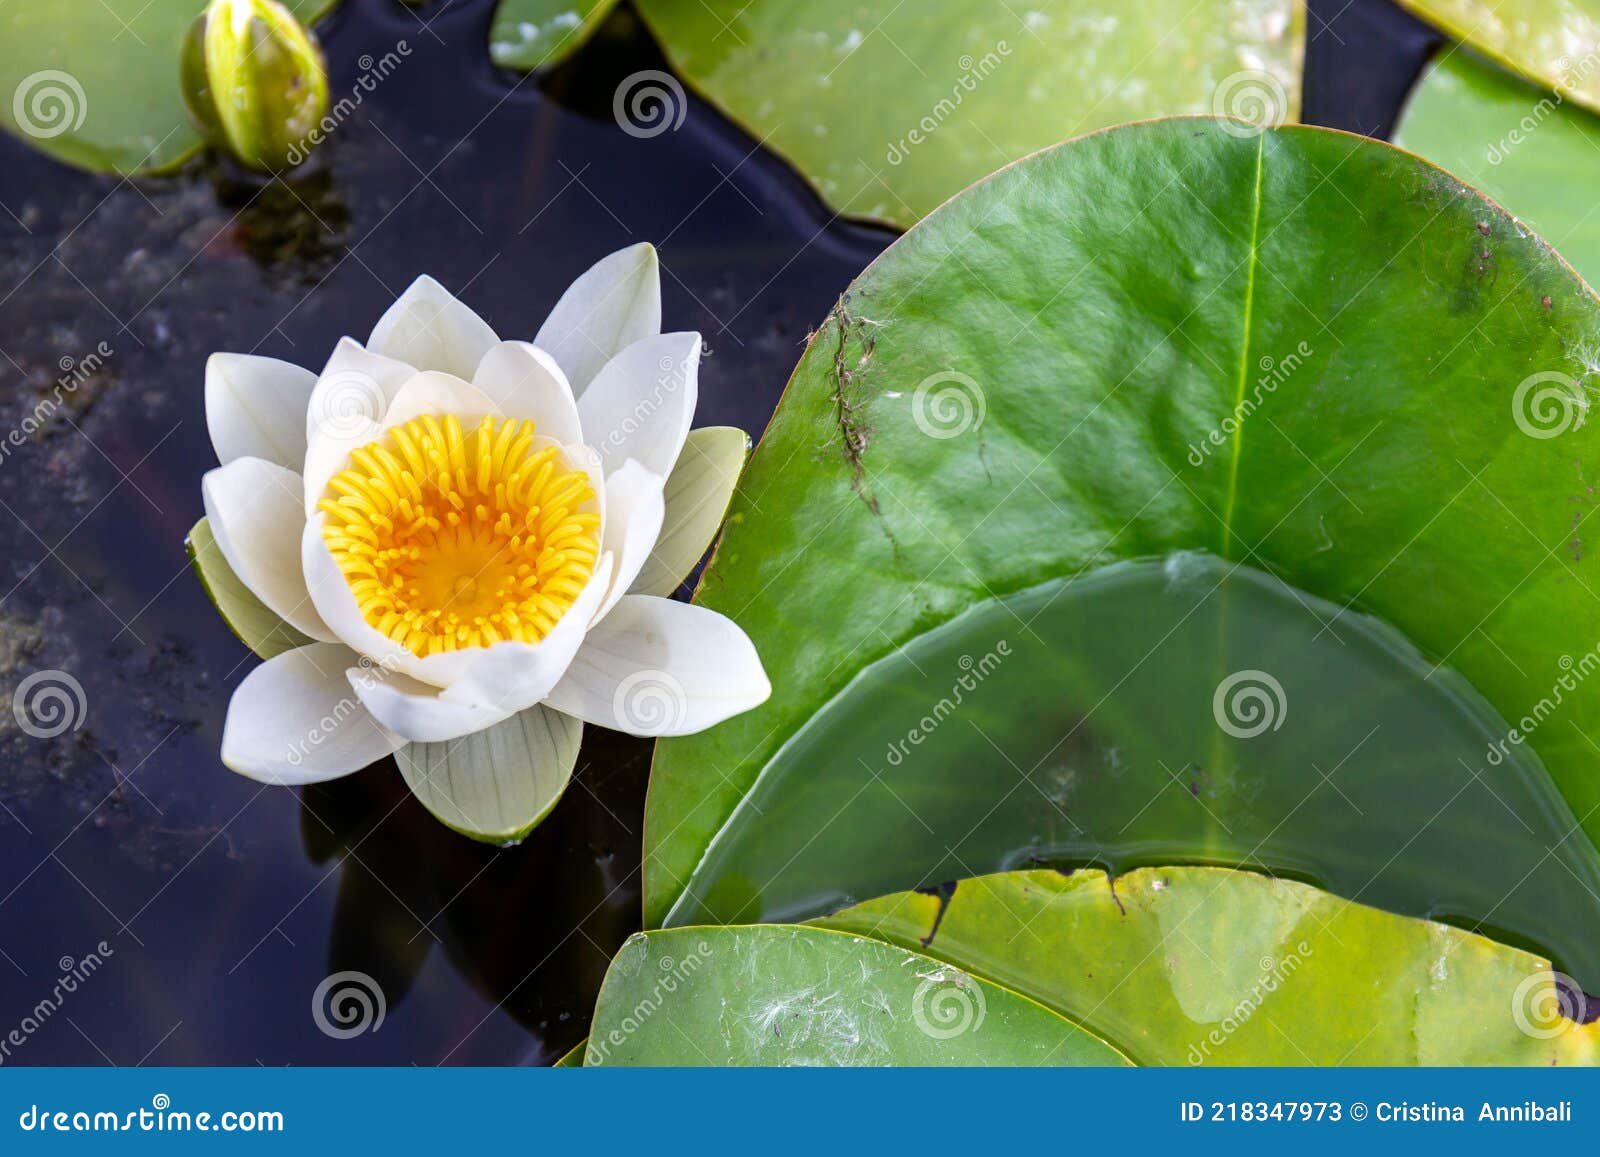 a flower of water lily `alba` lotus with a yellow heart brillante floating in a pond with its characteristic large round leaves.